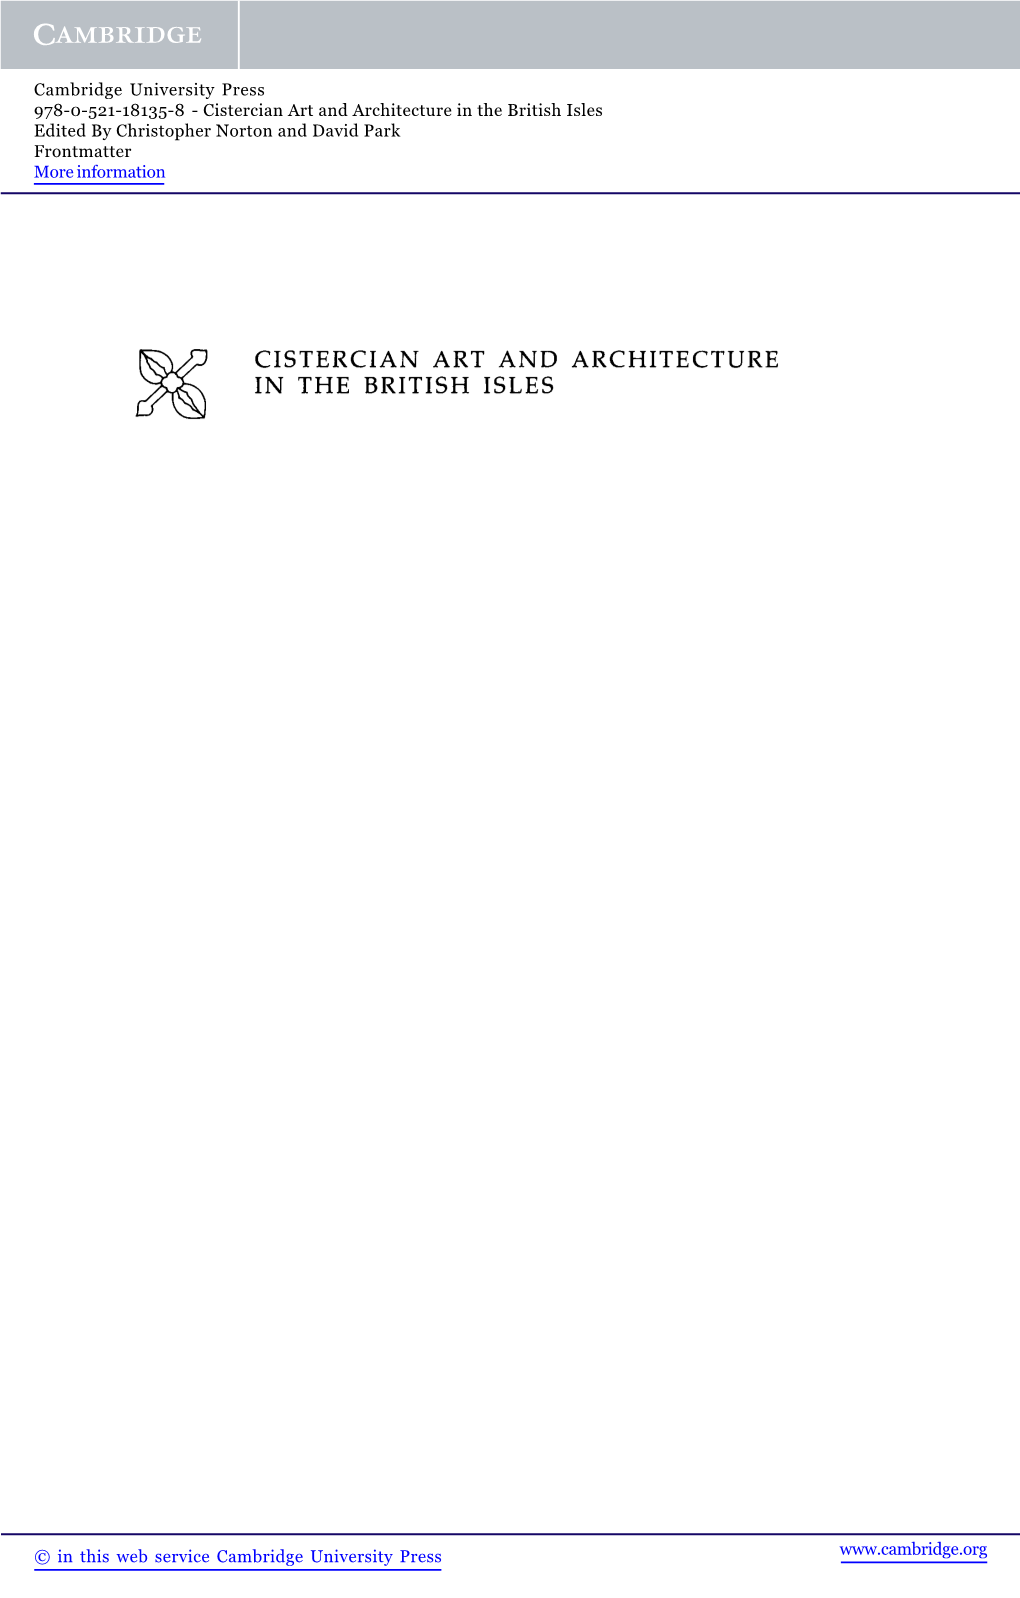 Cistercian Art and Architecture in the British Isles Edited by Christopher Norton and David Park Frontmatter More Information